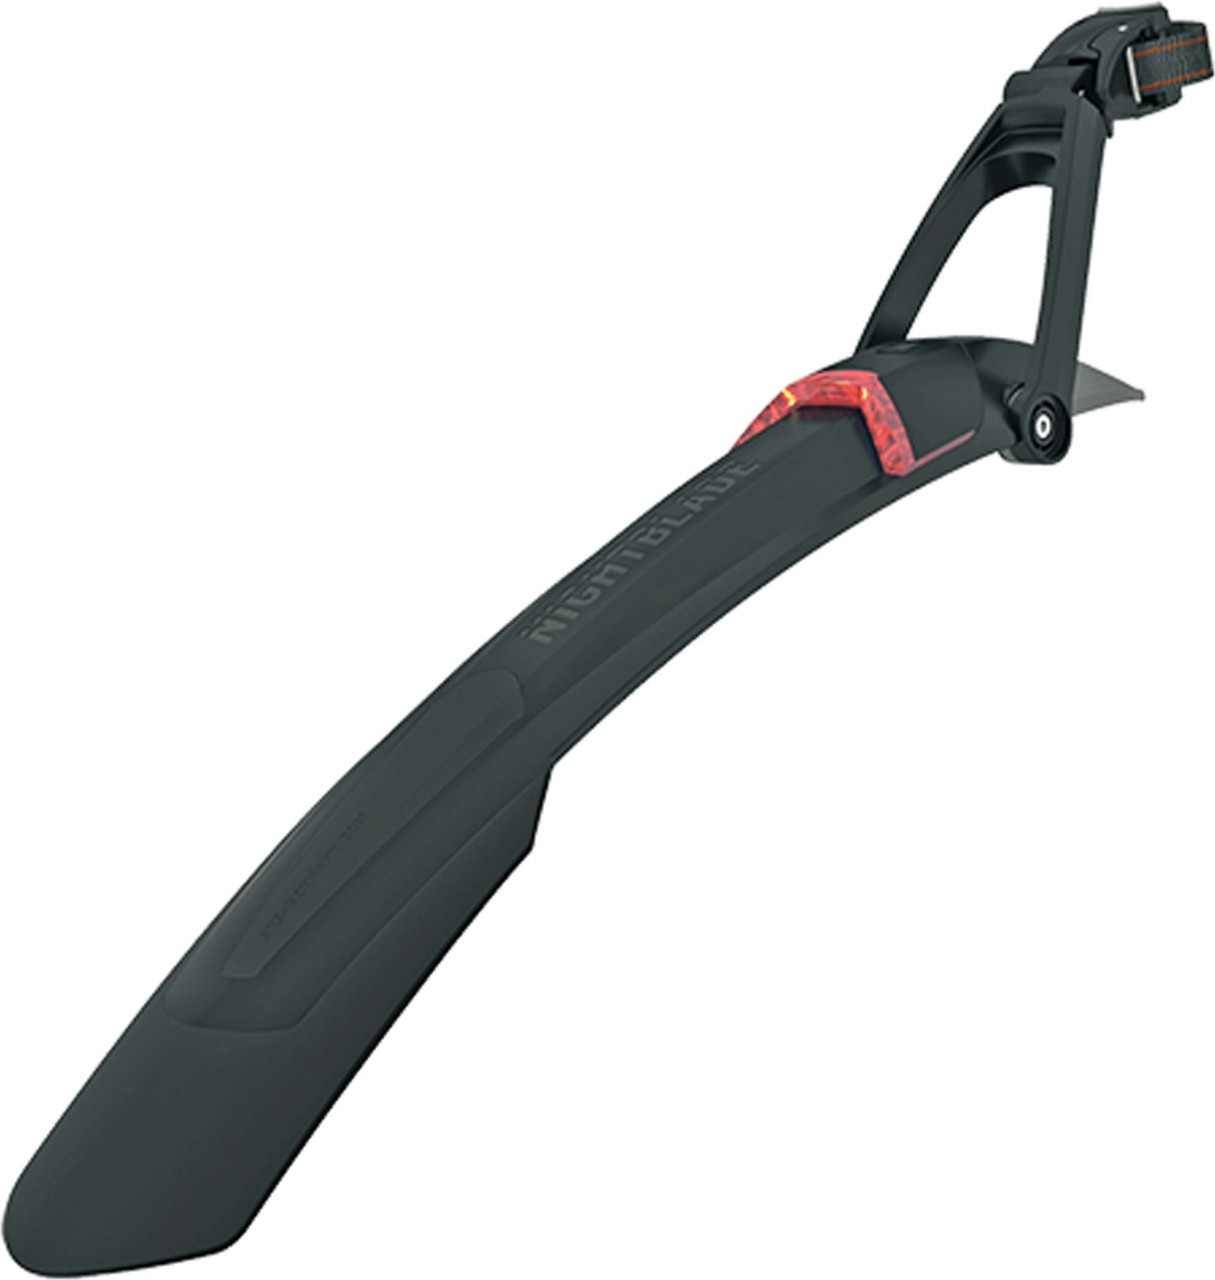 SKS Nightblade 26+27,5" - Mudguard with integrated StVZO rear light